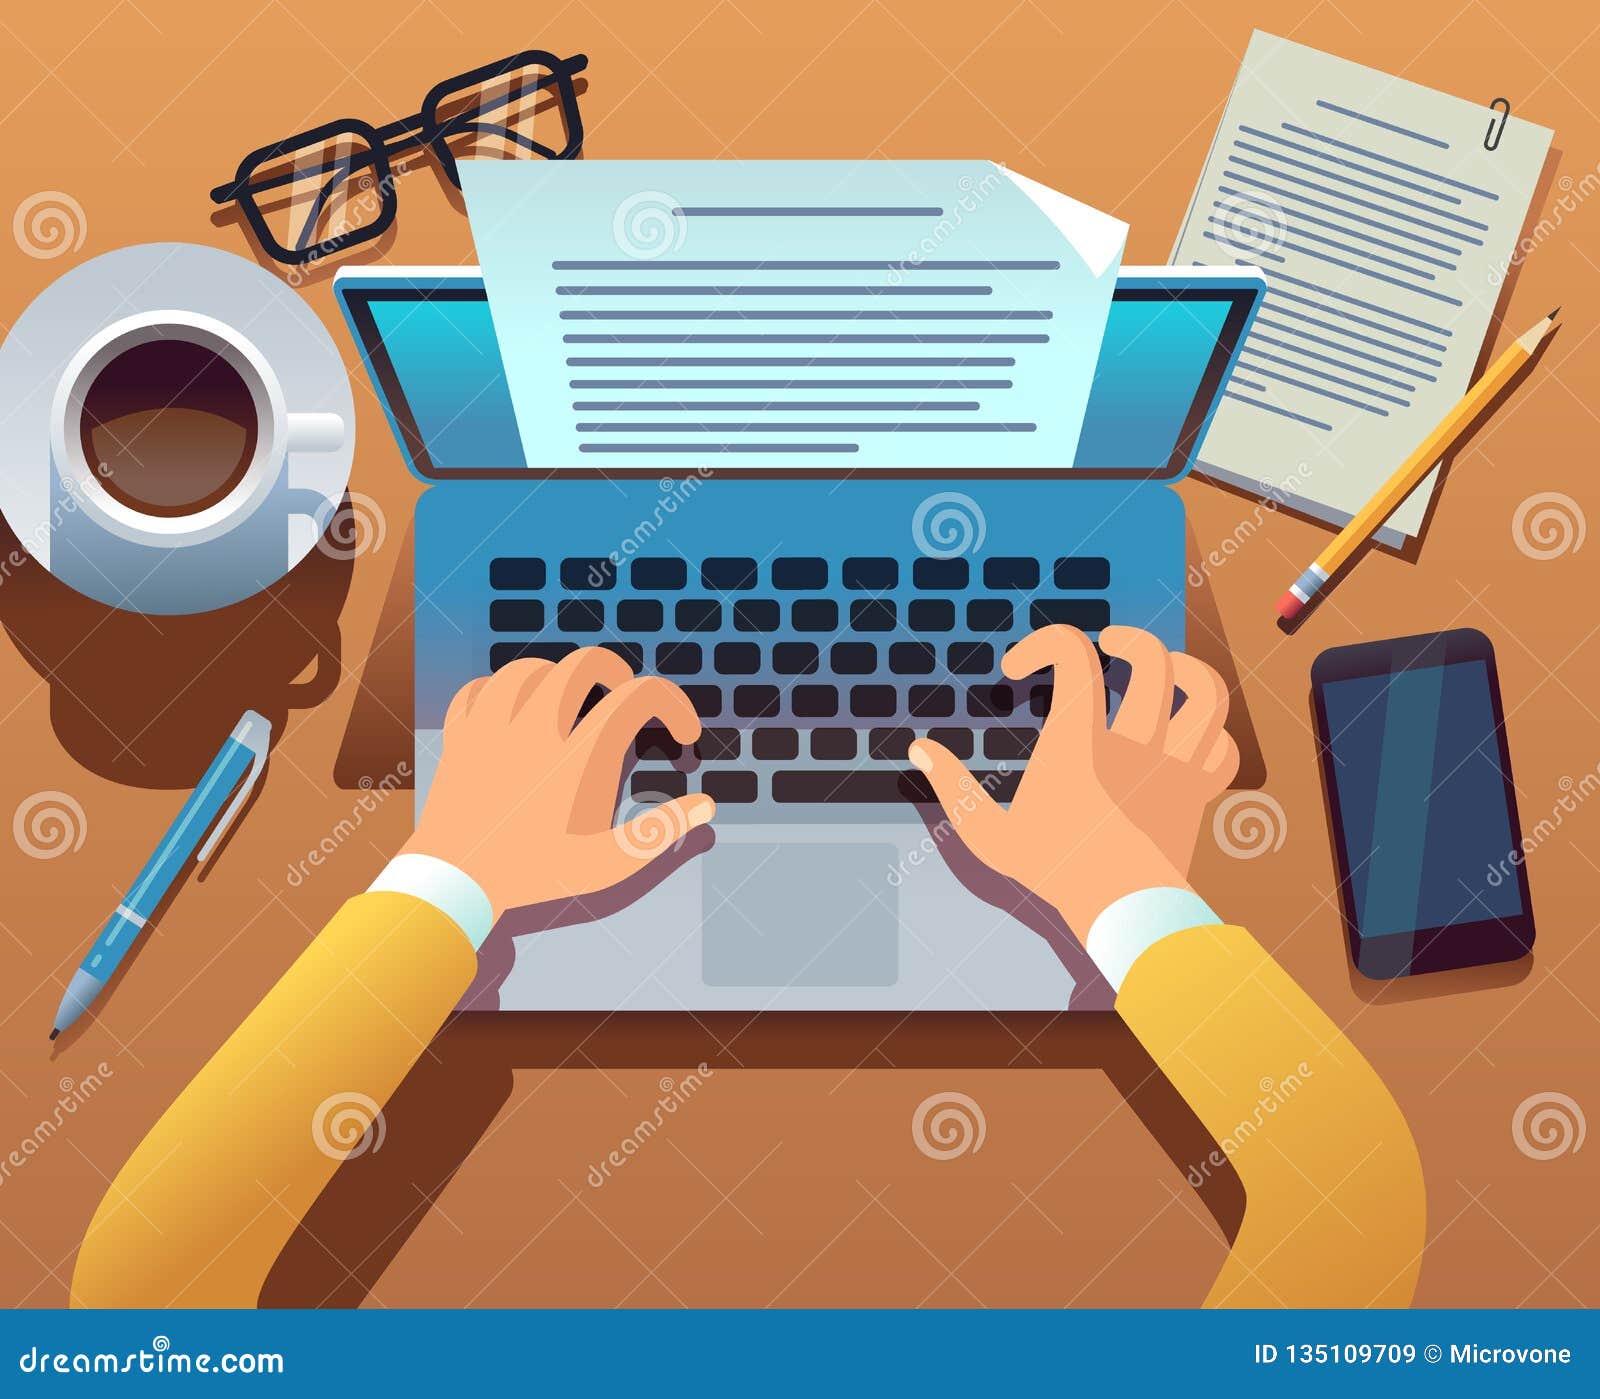 writer writes document. journalist create storytelling with laptop. hands typing on computer keyboard. story writing